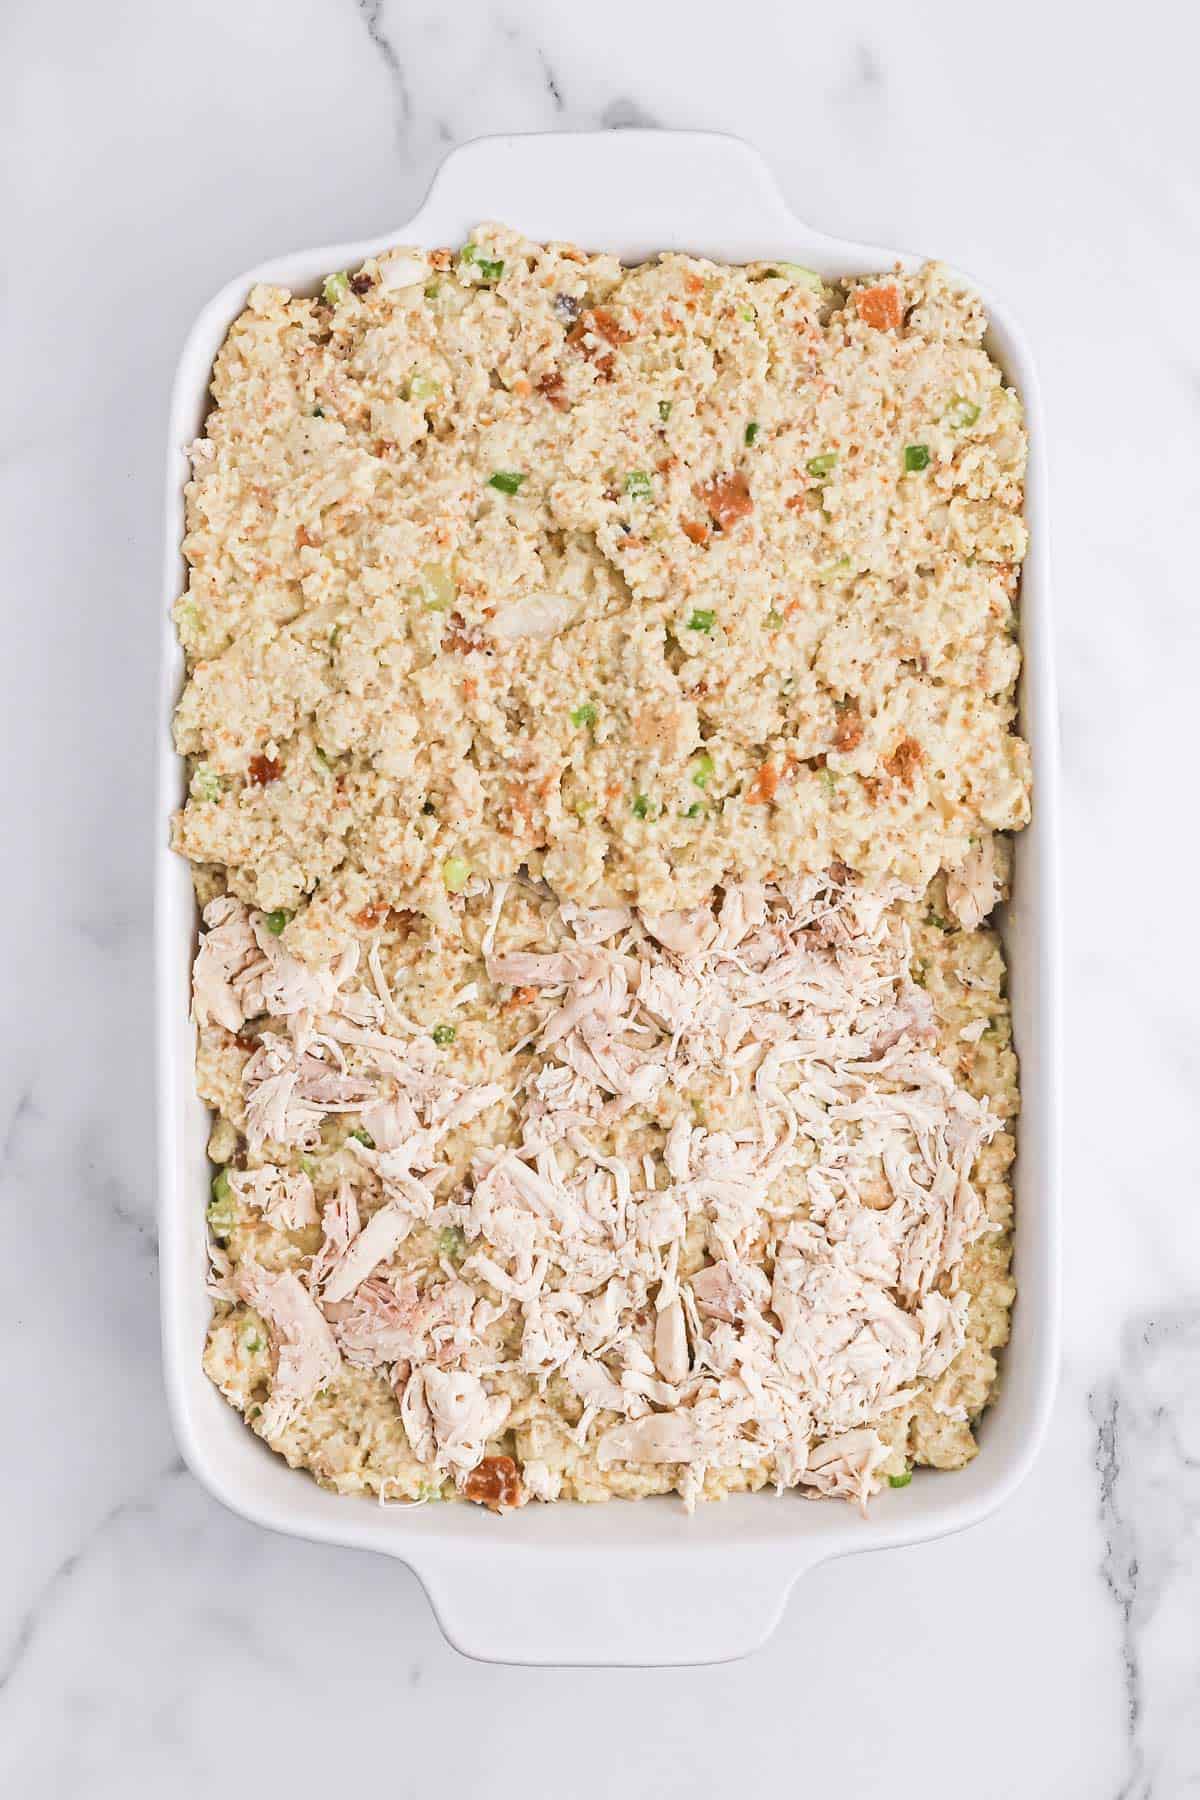 Cornbread stuffing layered with meat in the middle.